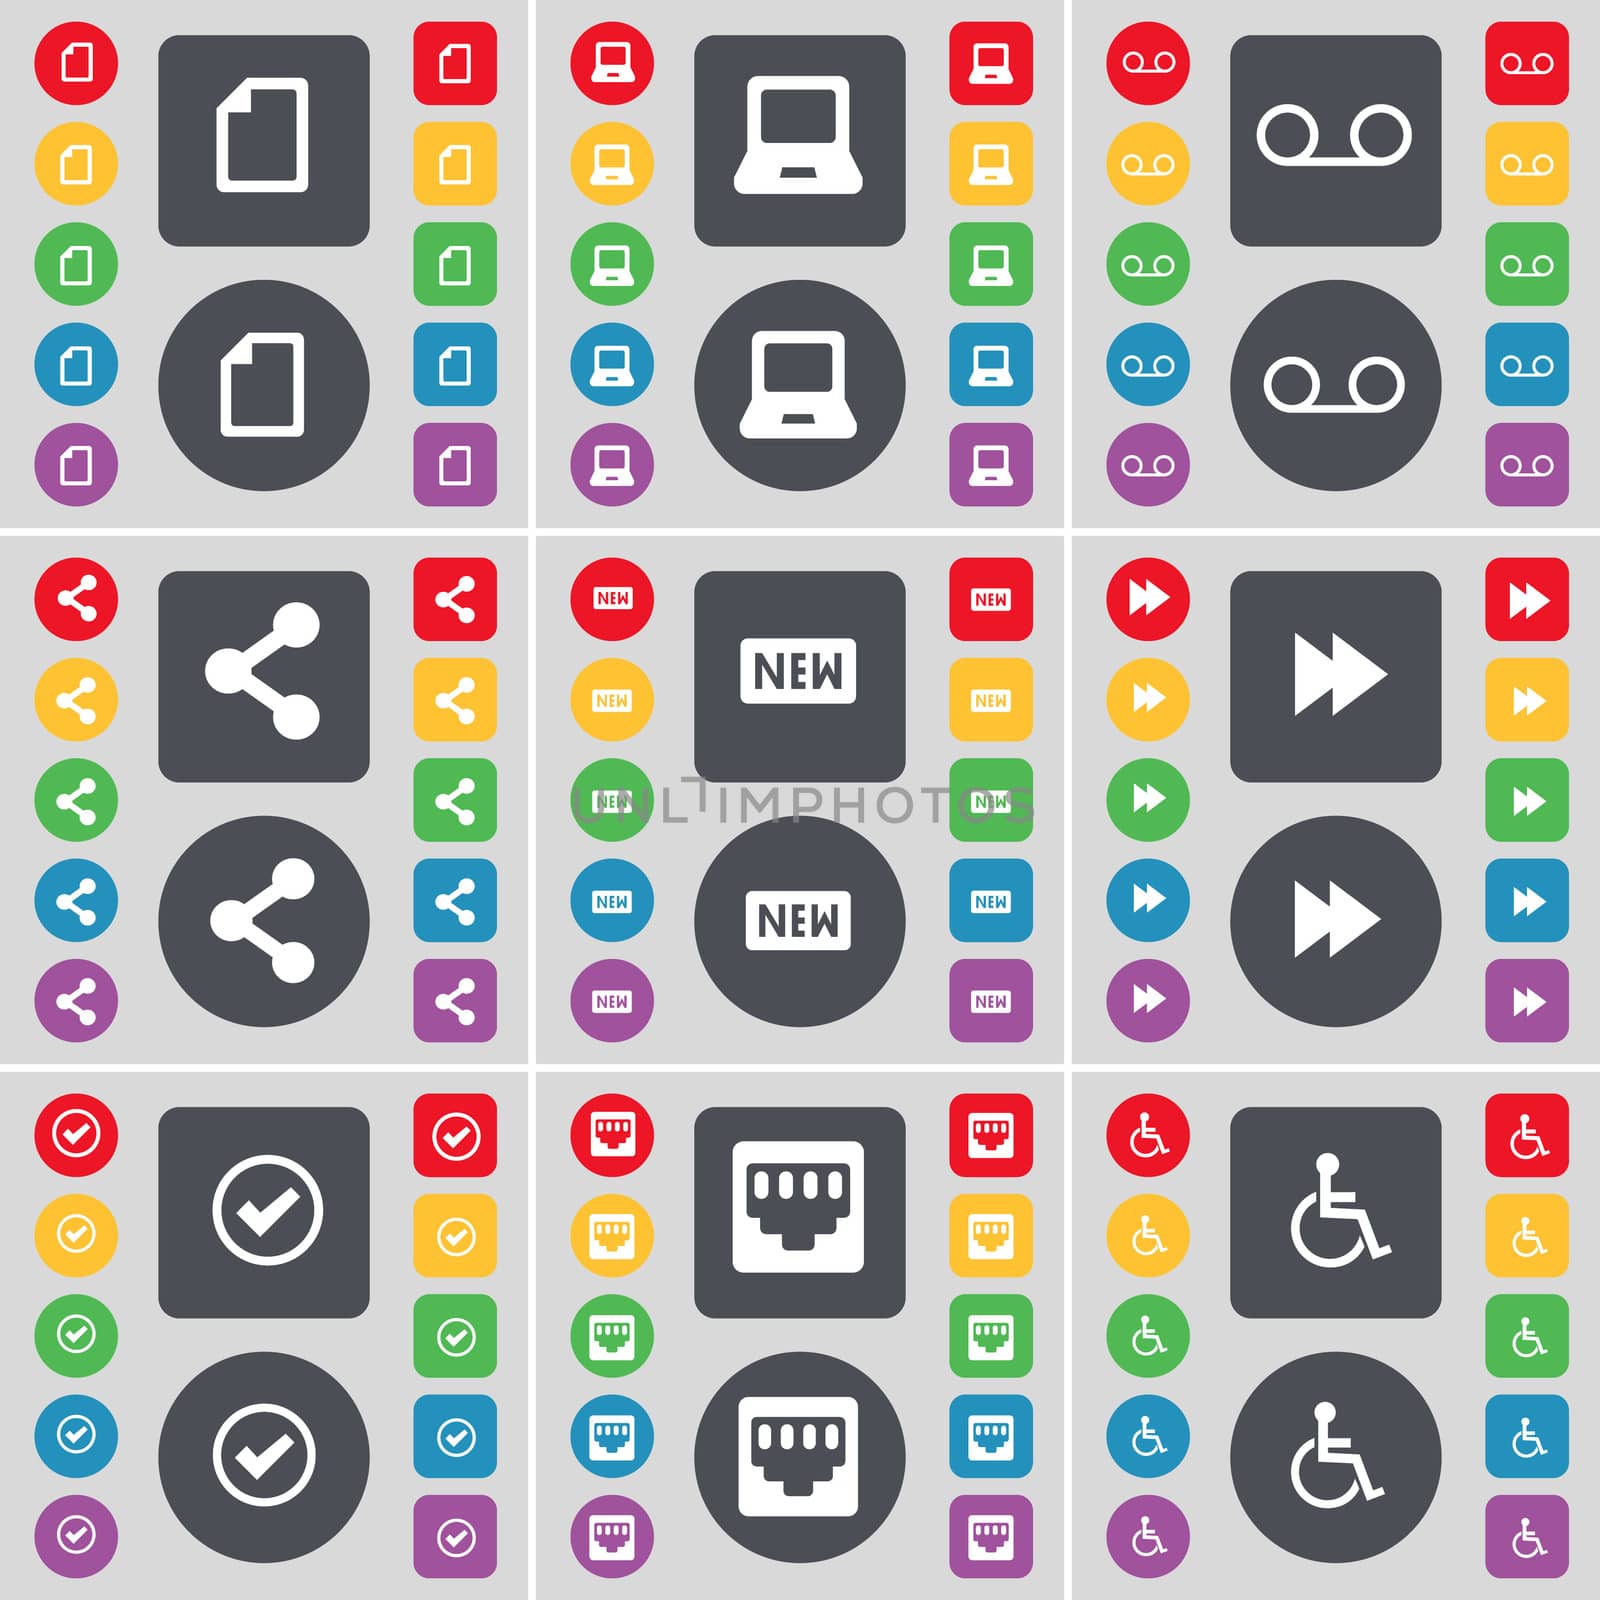 File, Laptop, Cassette, Share, New, Rewind, Tick, LAN socket, Disabled person icon symbol. A large set of flat, colored buttons for your design. illustration